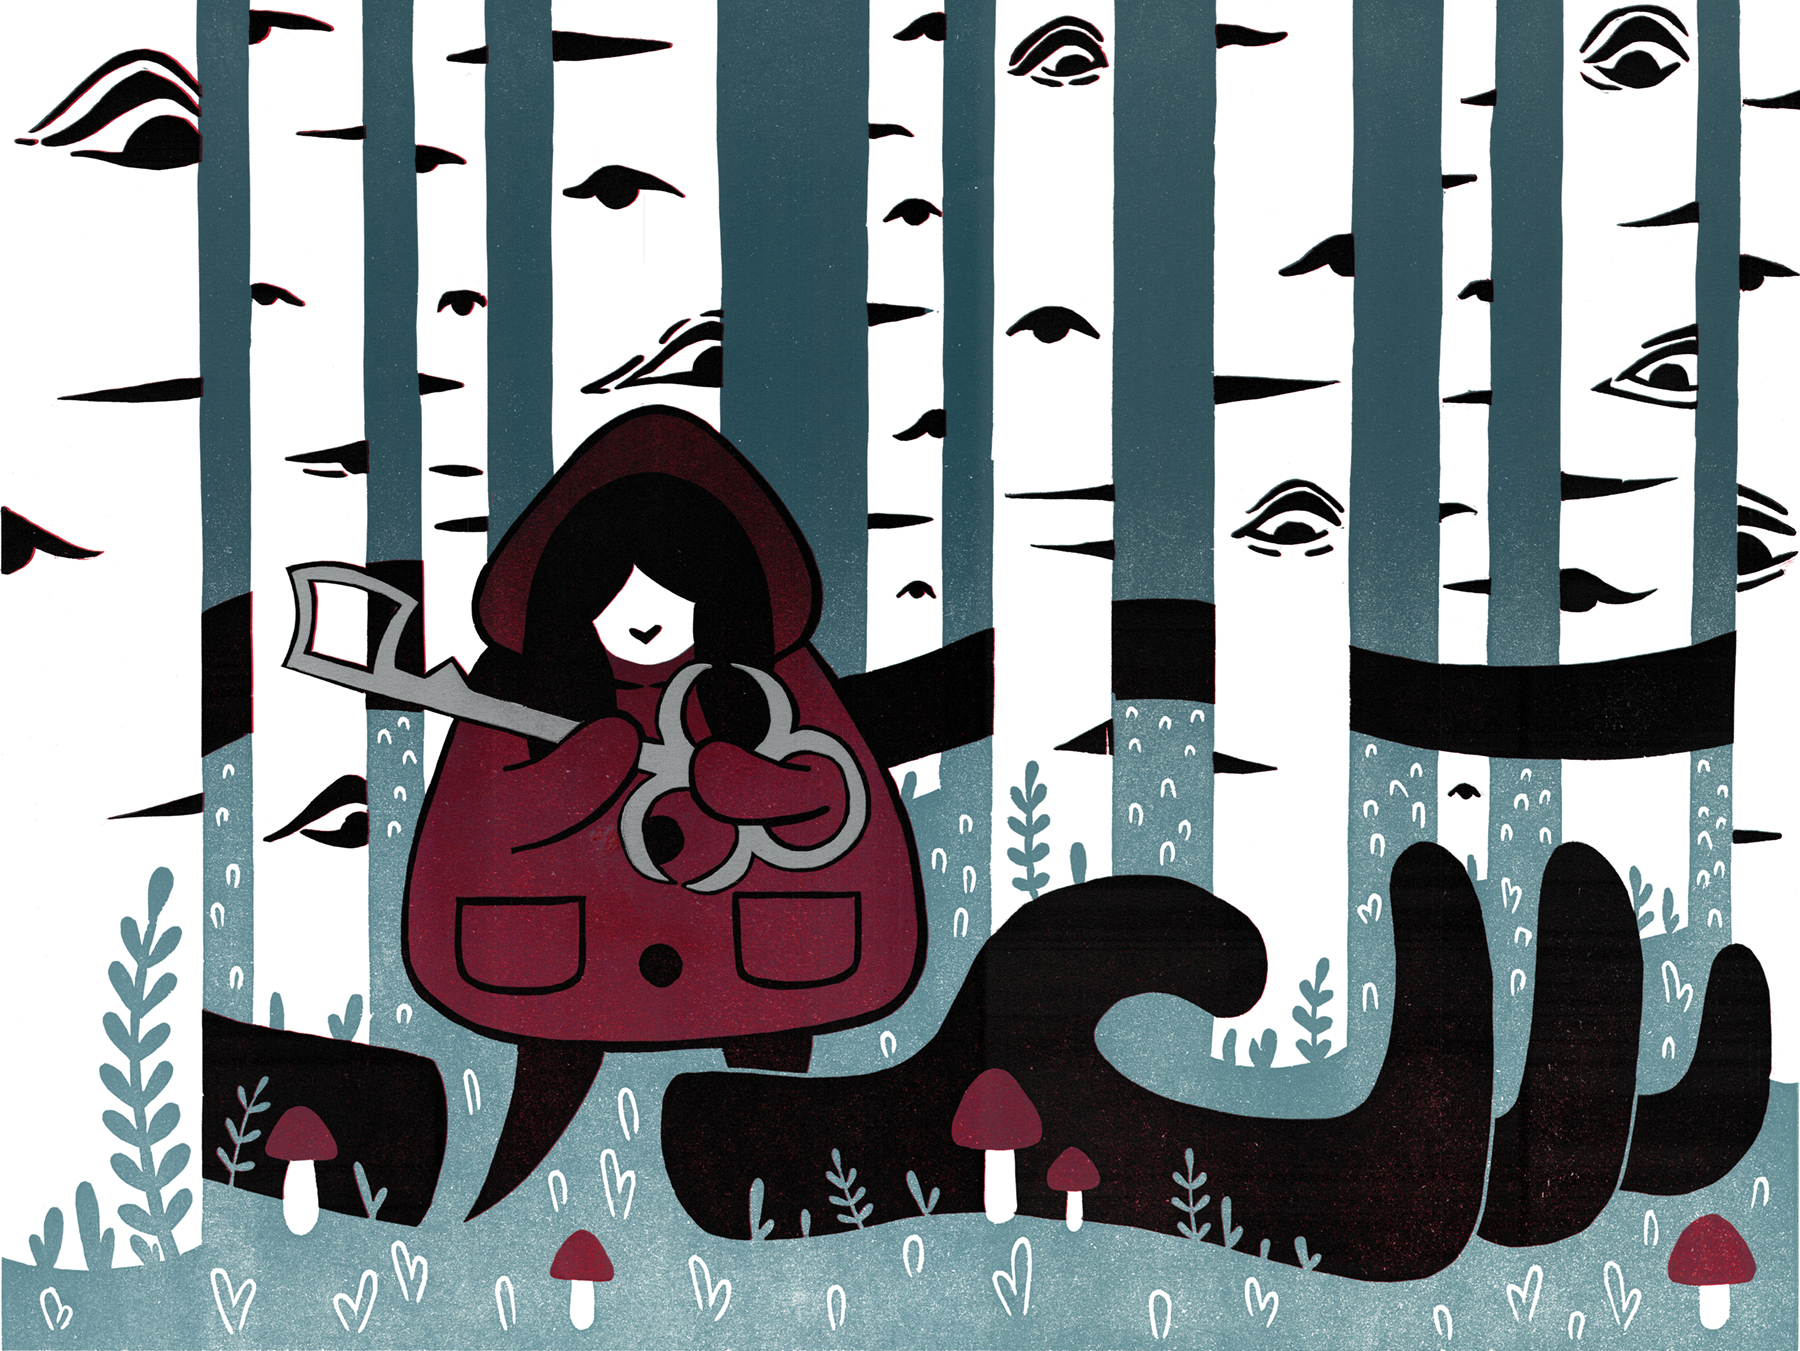 A girl in a red cloak holding a key with a severed black inky hand underneath her in the forest. Image courtesy of Jade Lamoreaux